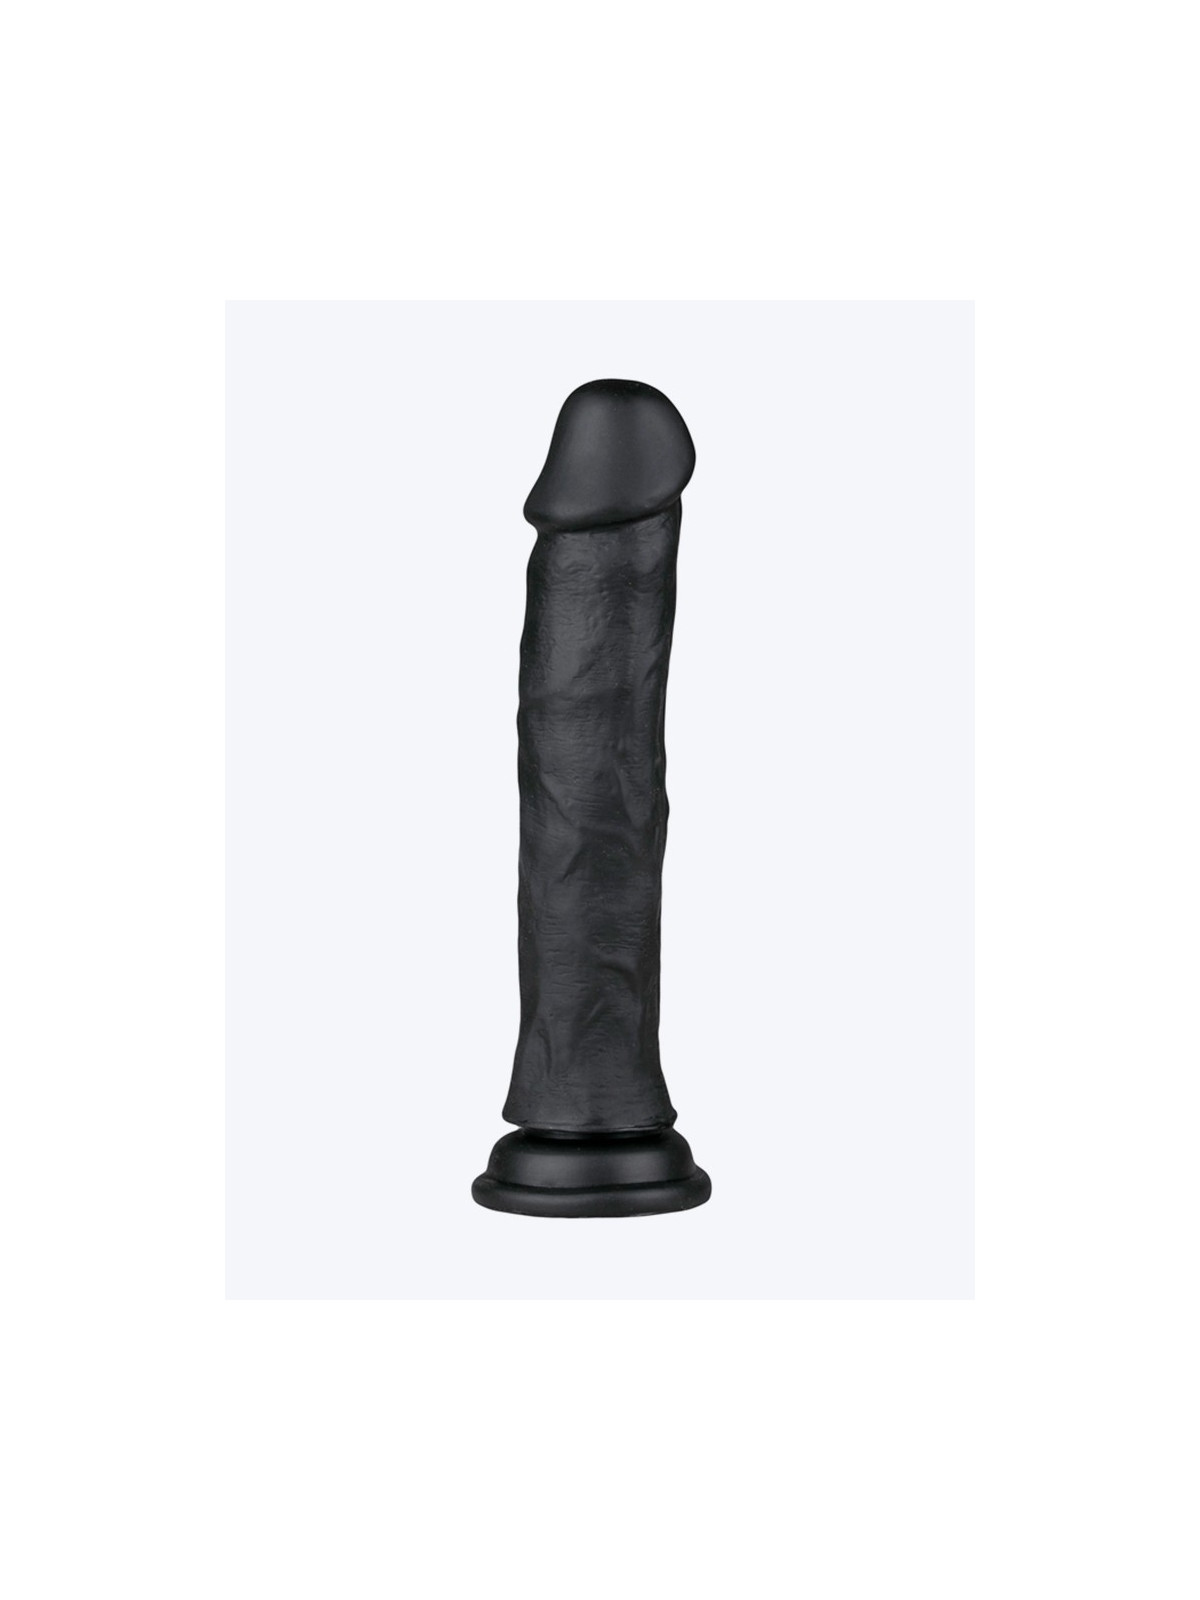 Easy Toys Realistic Dildo Muscle 21.5 cm - Black